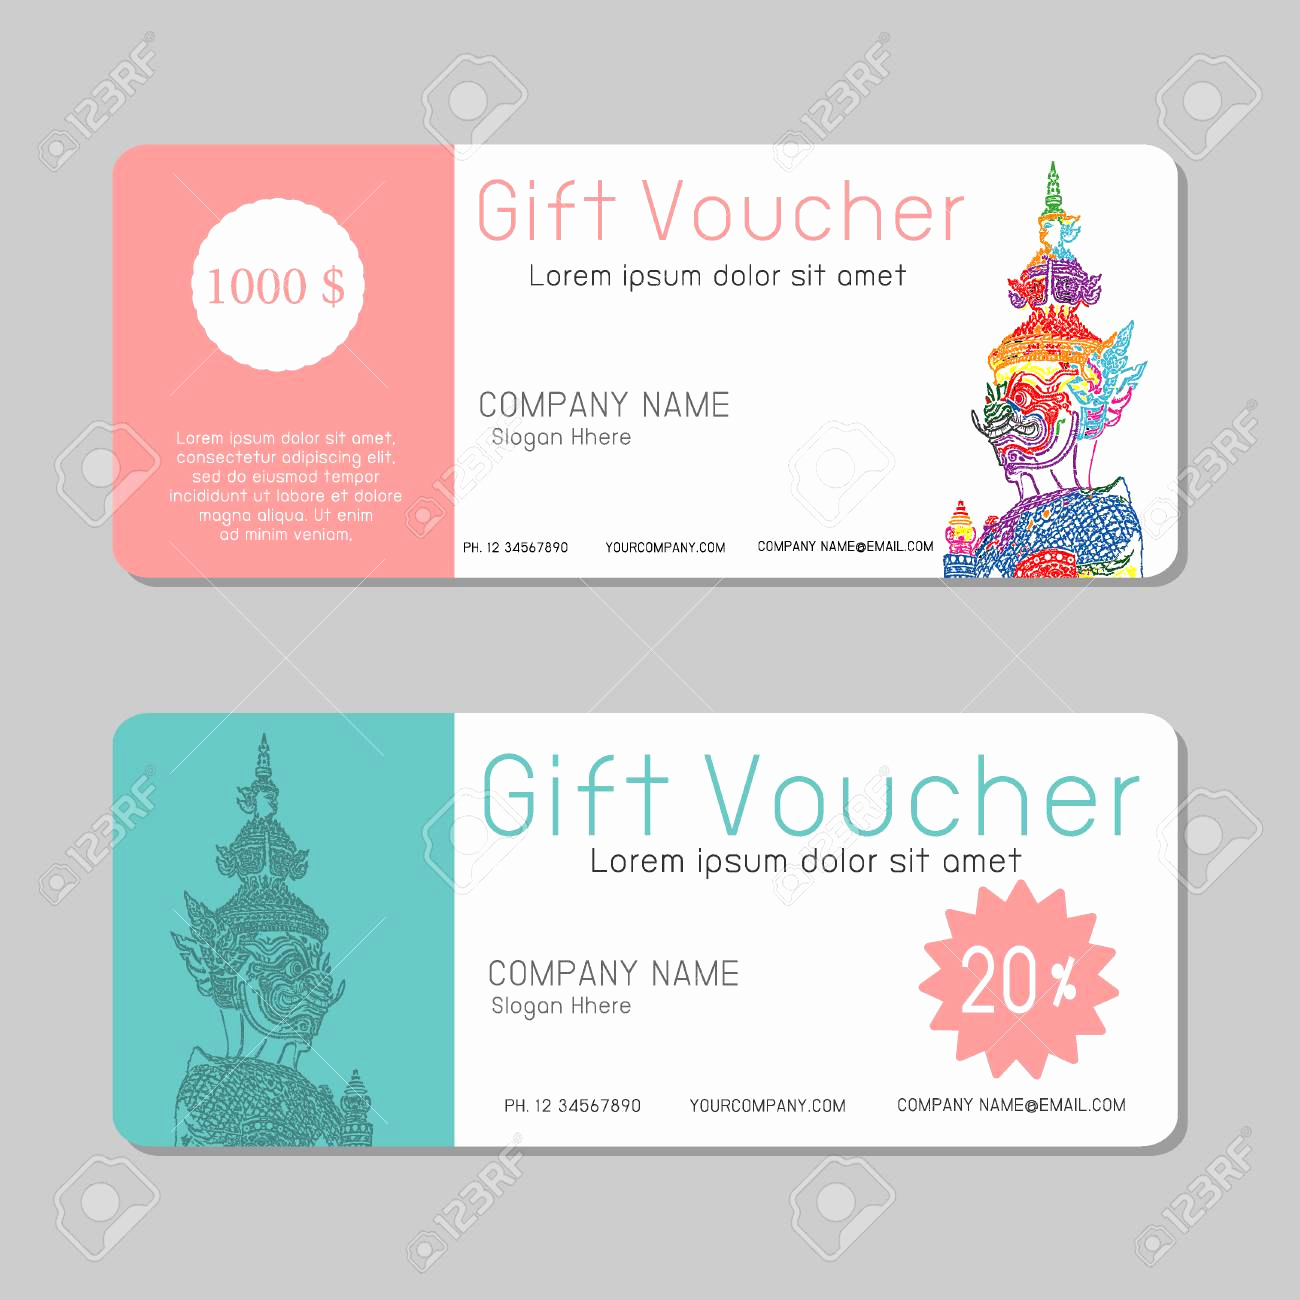 Email Gift Certificate Template Luxury Gift Voucher Email Template